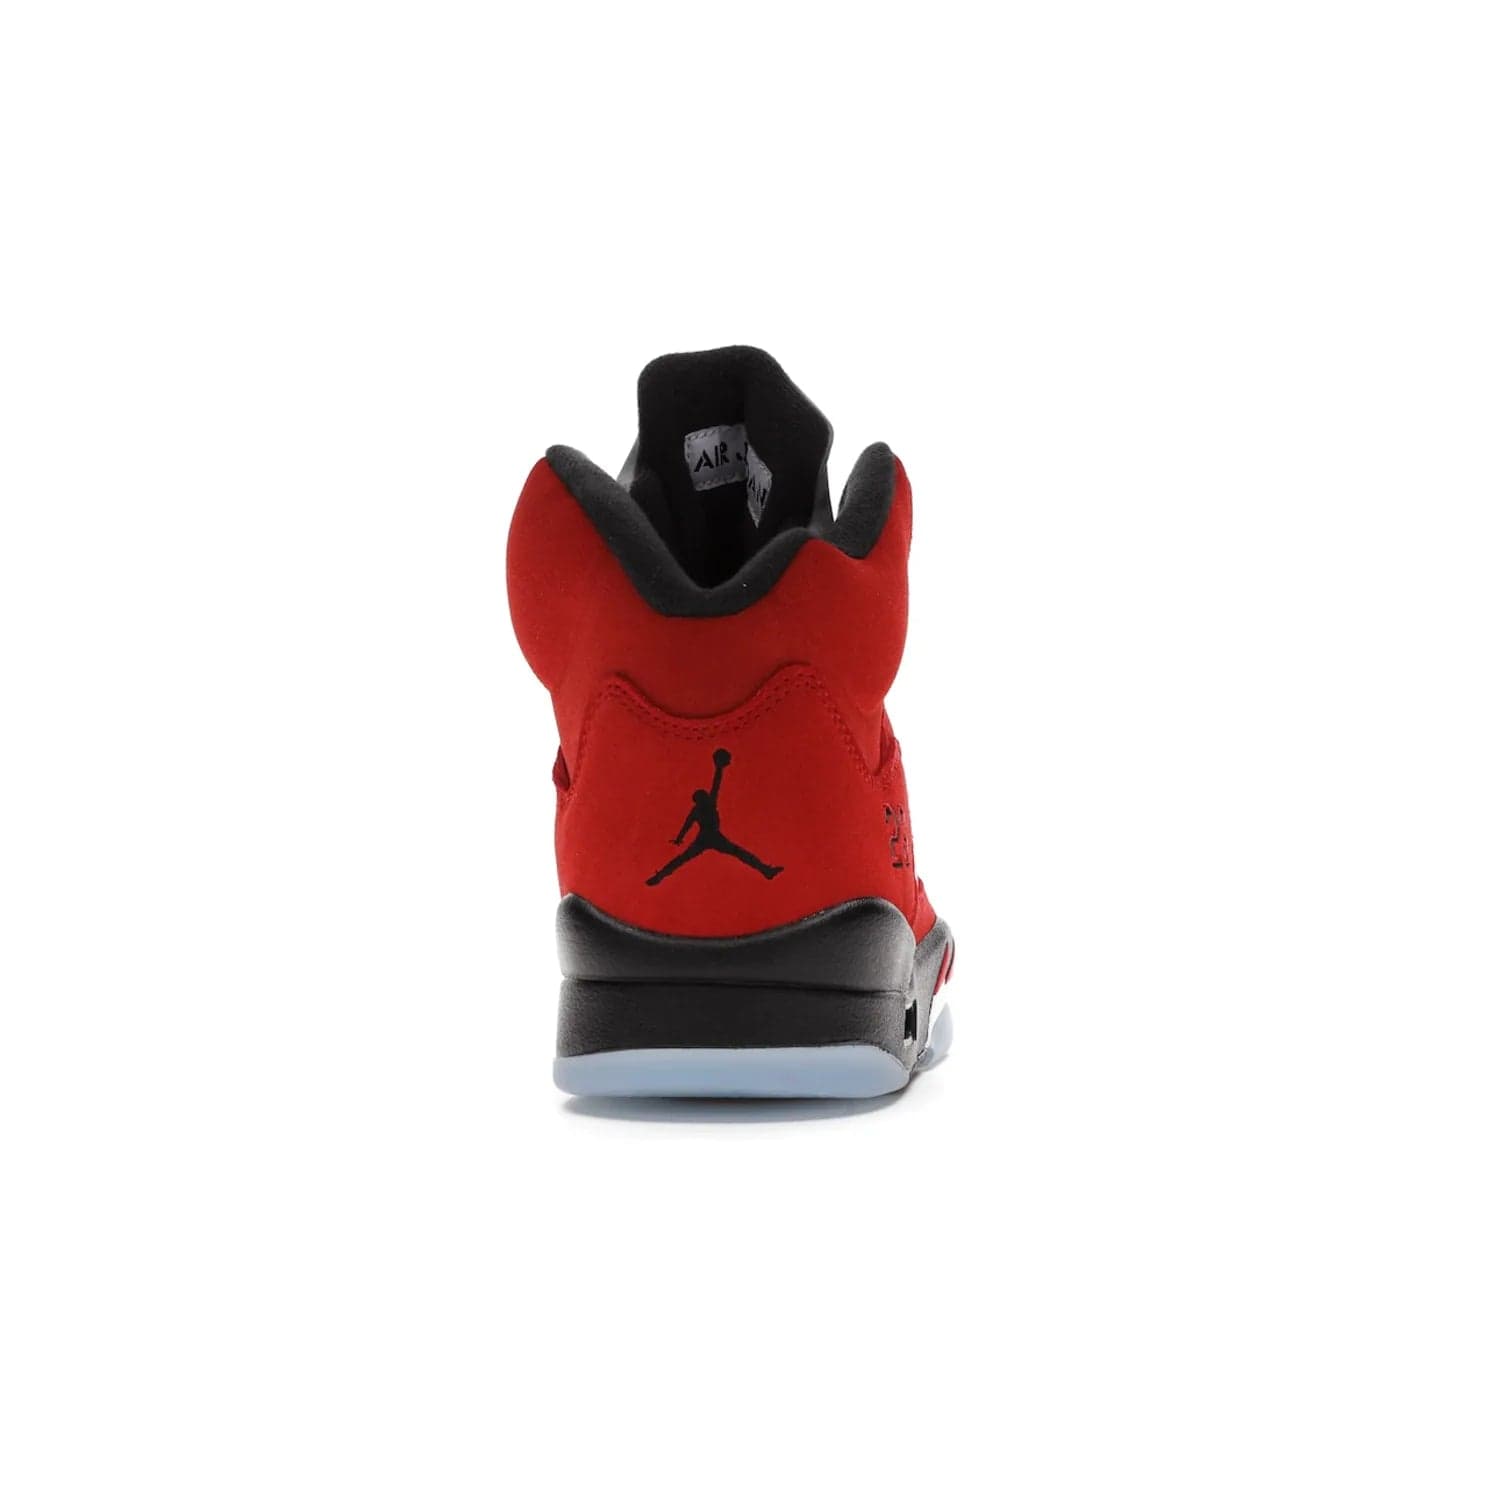 Jordan 5 Retro Raging Bull Red (2021) - Image 28 - Only at www.BallersClubKickz.com - Get ready for the 2021 stand-alone release of the Air Jordan 5 Raging Bulls! This all-suede upper combines luxe details like a Jumpman logo, red & black "23" embroidery and shark tooth detailing, atop a black midsole. Don't miss out - release date in April 2021 for $190.